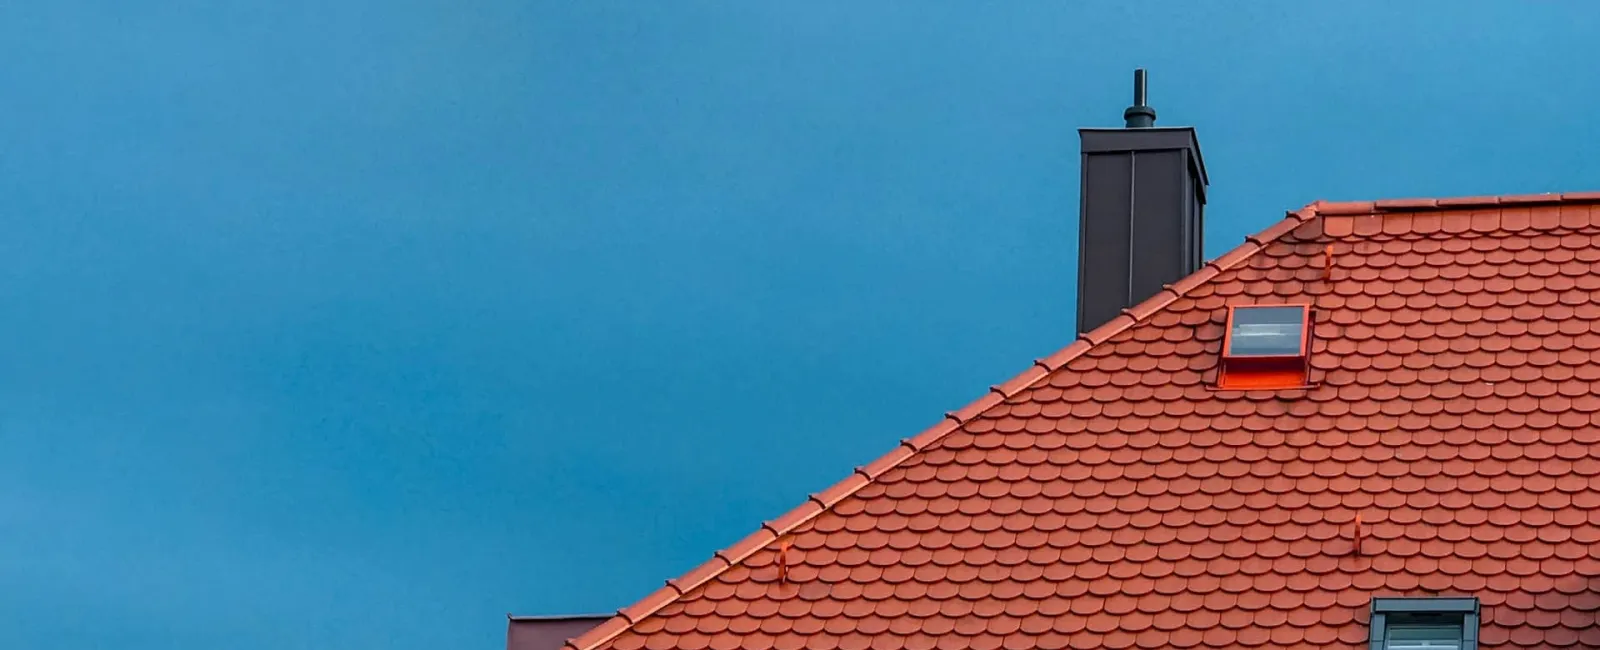 5 Reasons Why Insurance Won’t Cover Your Roof Damage